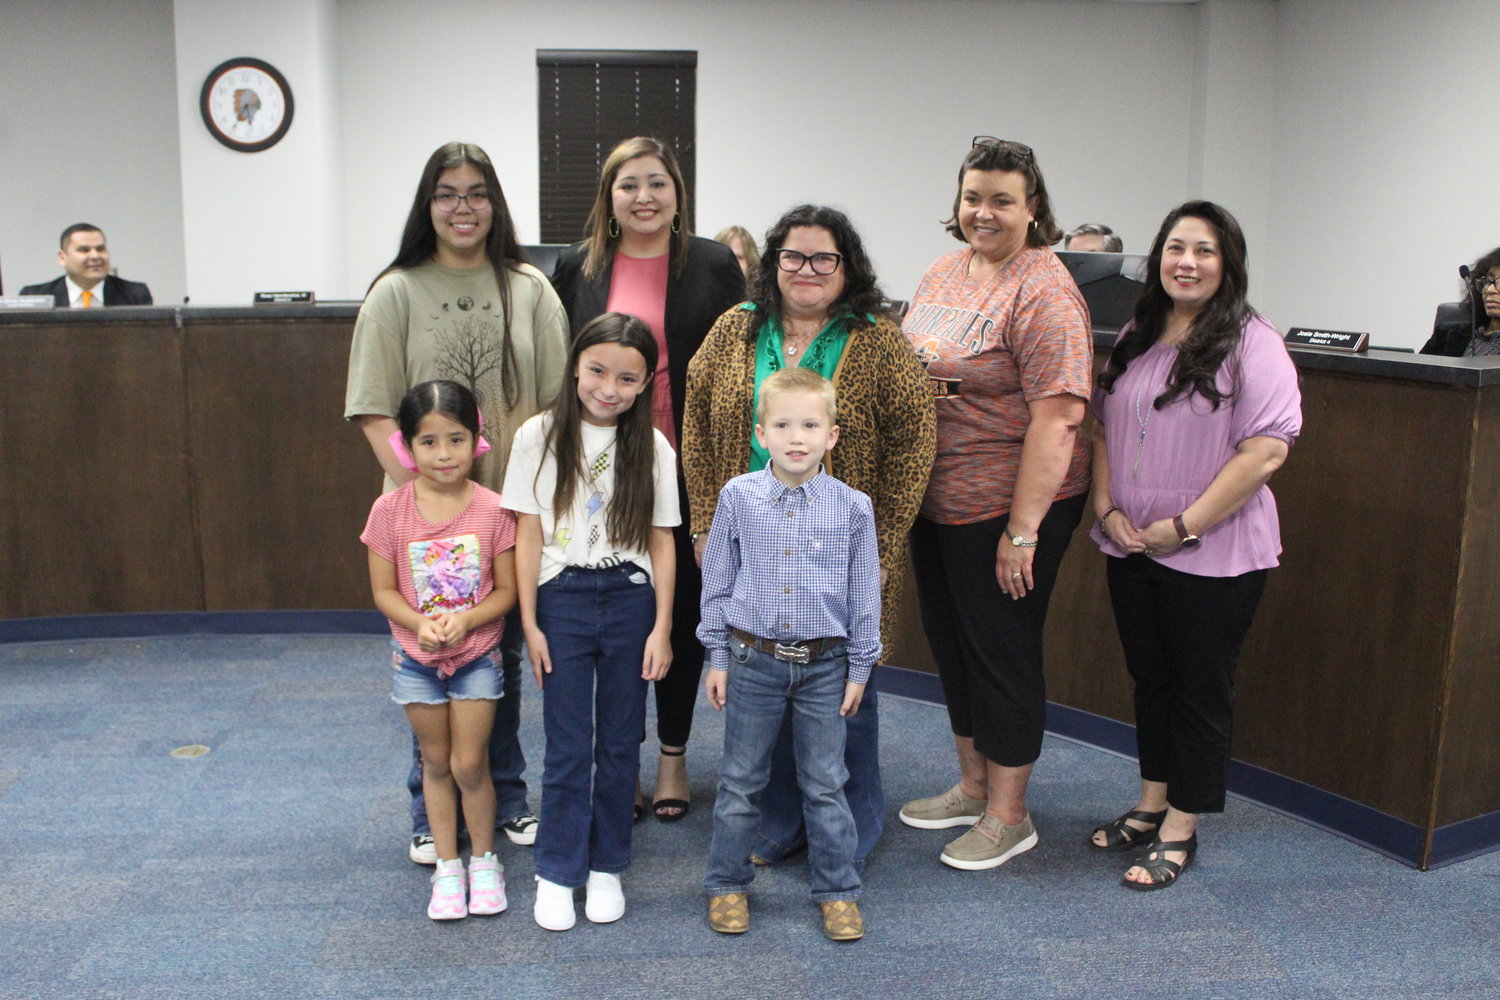 The Gonzales ISD school recognizes the hard work from students and staff in the Monday, Jan. 9 meeting. Front row: first grader Alondra Castillo, fourth grader Olivia Kuntschik, and pre-kindergarter Dylan King. Back row: eight grader Peyton Olivares, Gonzales Primary Academy registrar Emily Parra, Gonzales North Avenue special education chair Kristi Gold, Gonzales Junior High math teacher Tracey Patek, Gonzales High School counselor Veronica Powell. NOT Pictured: Gonzales Elementary bilingual paraprofessional Martha Espinosa and junior Rafael Rodriguez Jr.